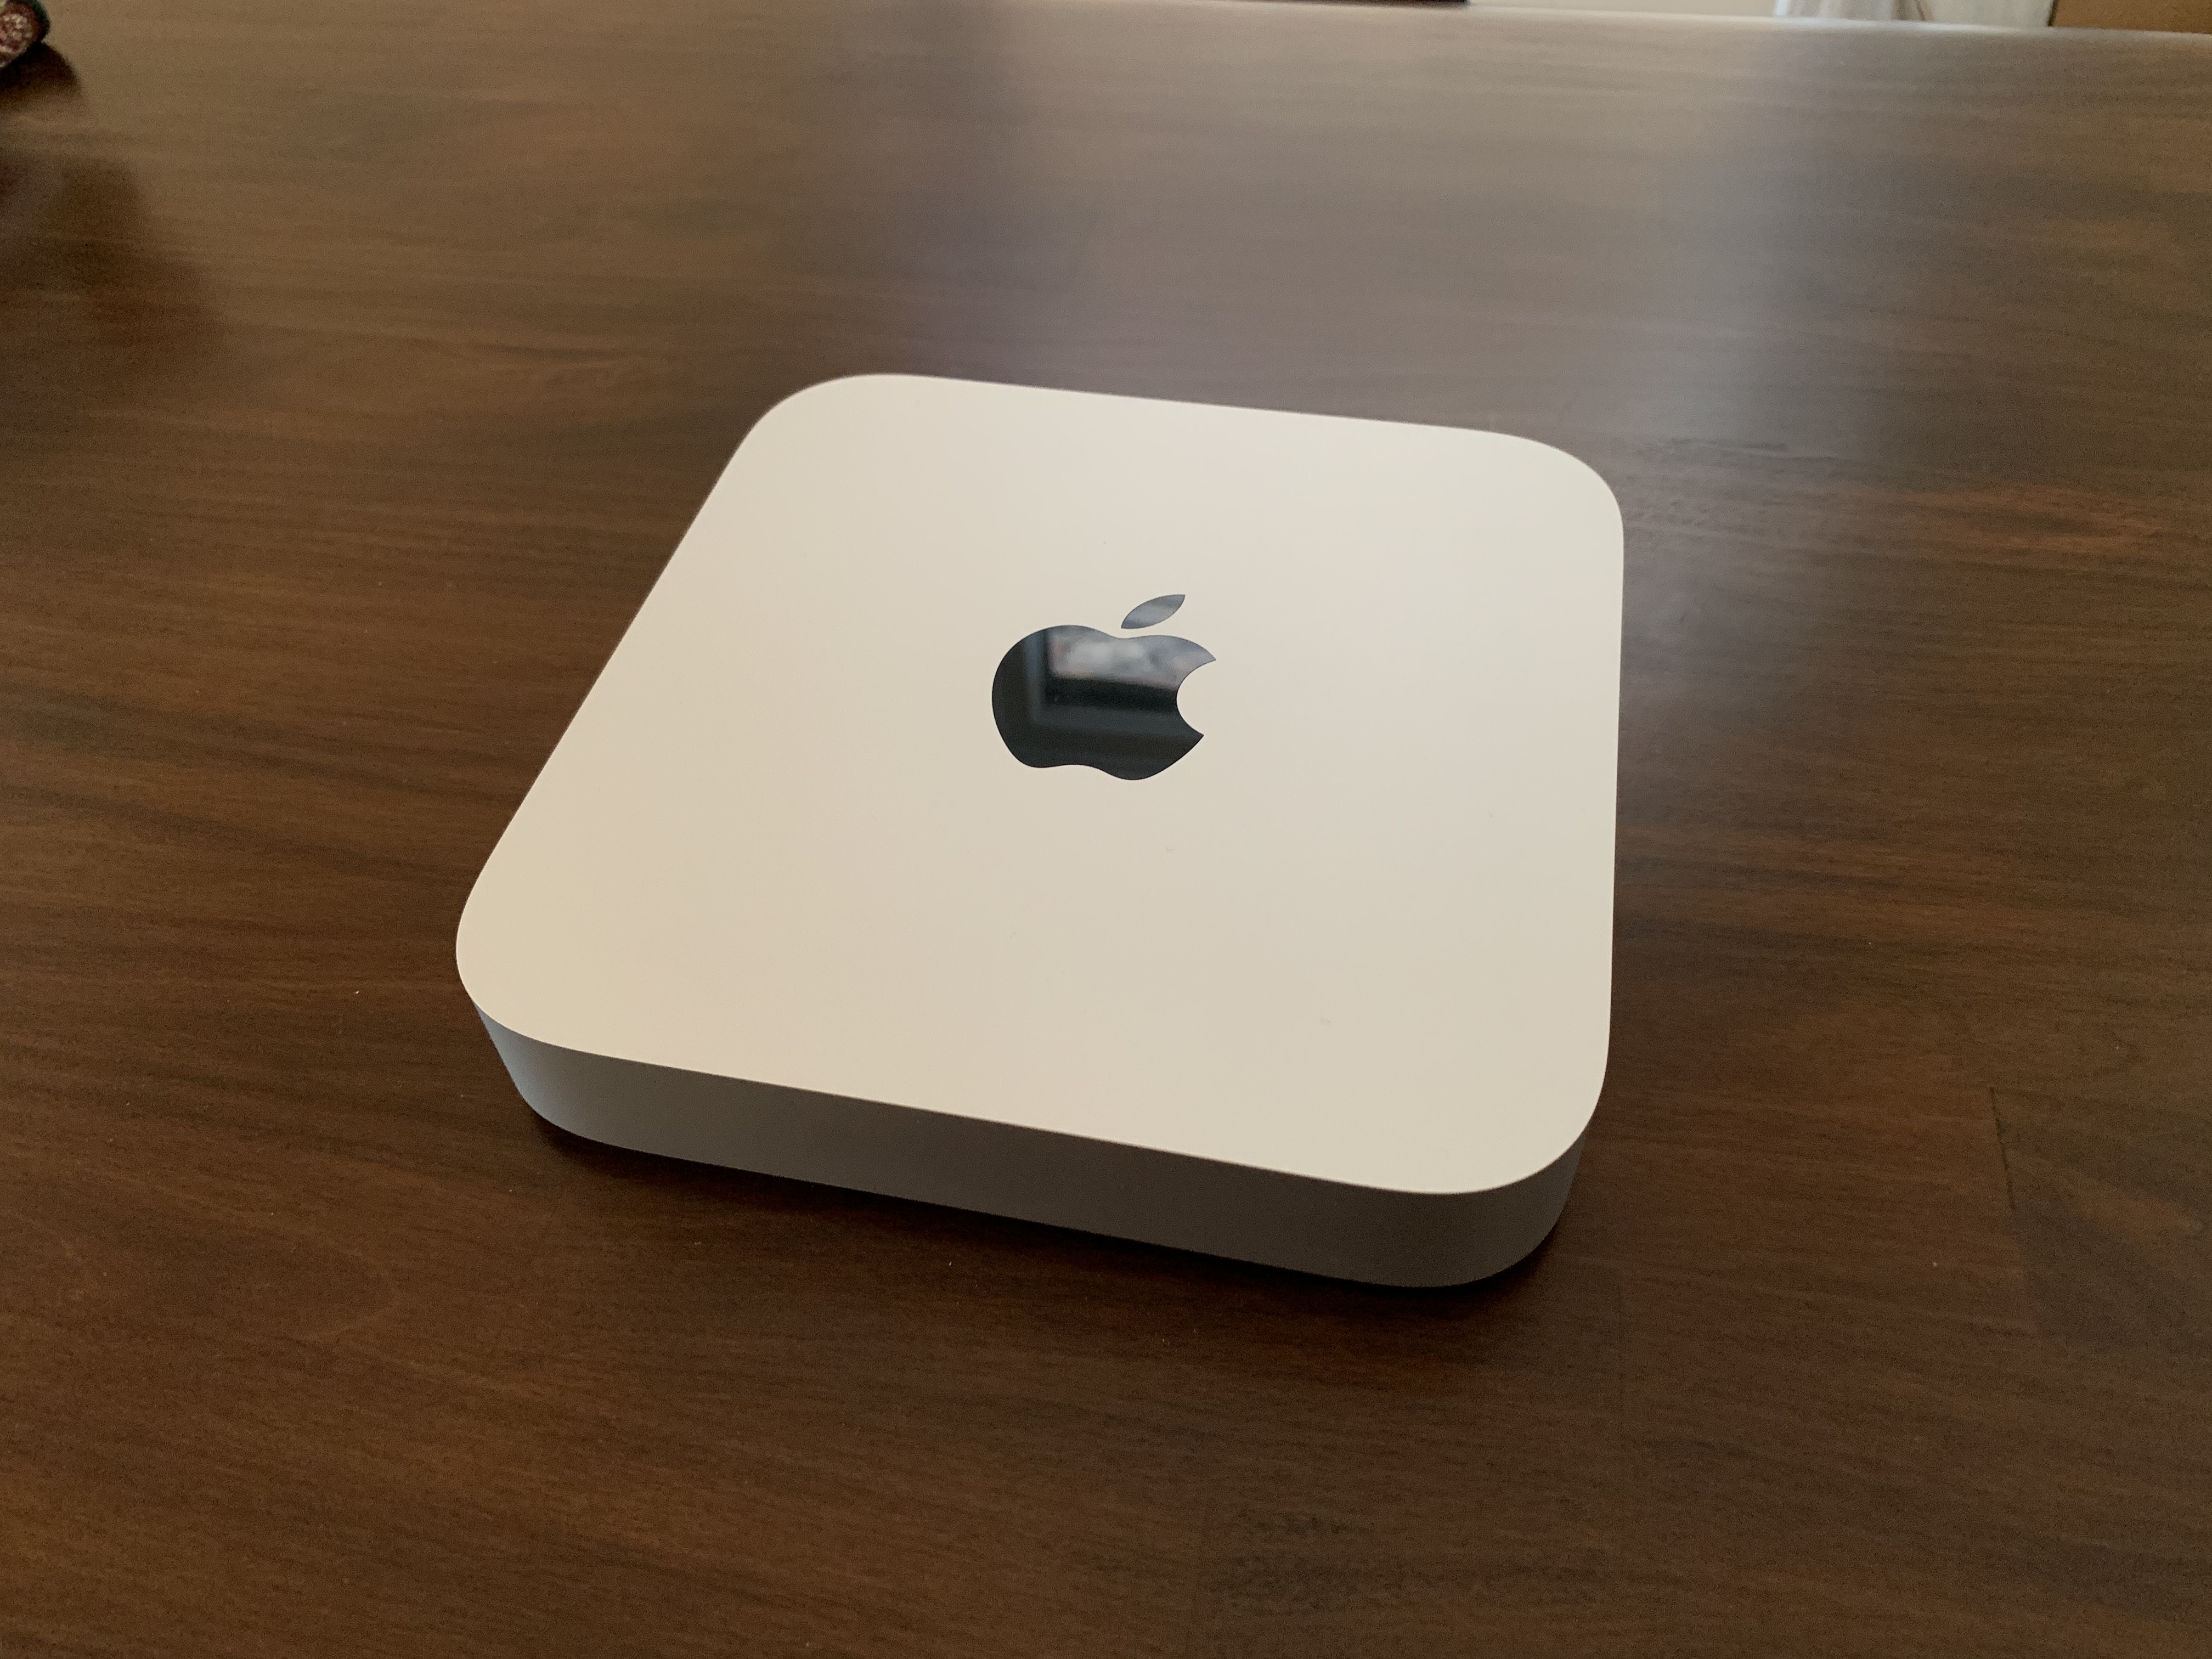 The Apple Mac mini 2020 equipped with M1.